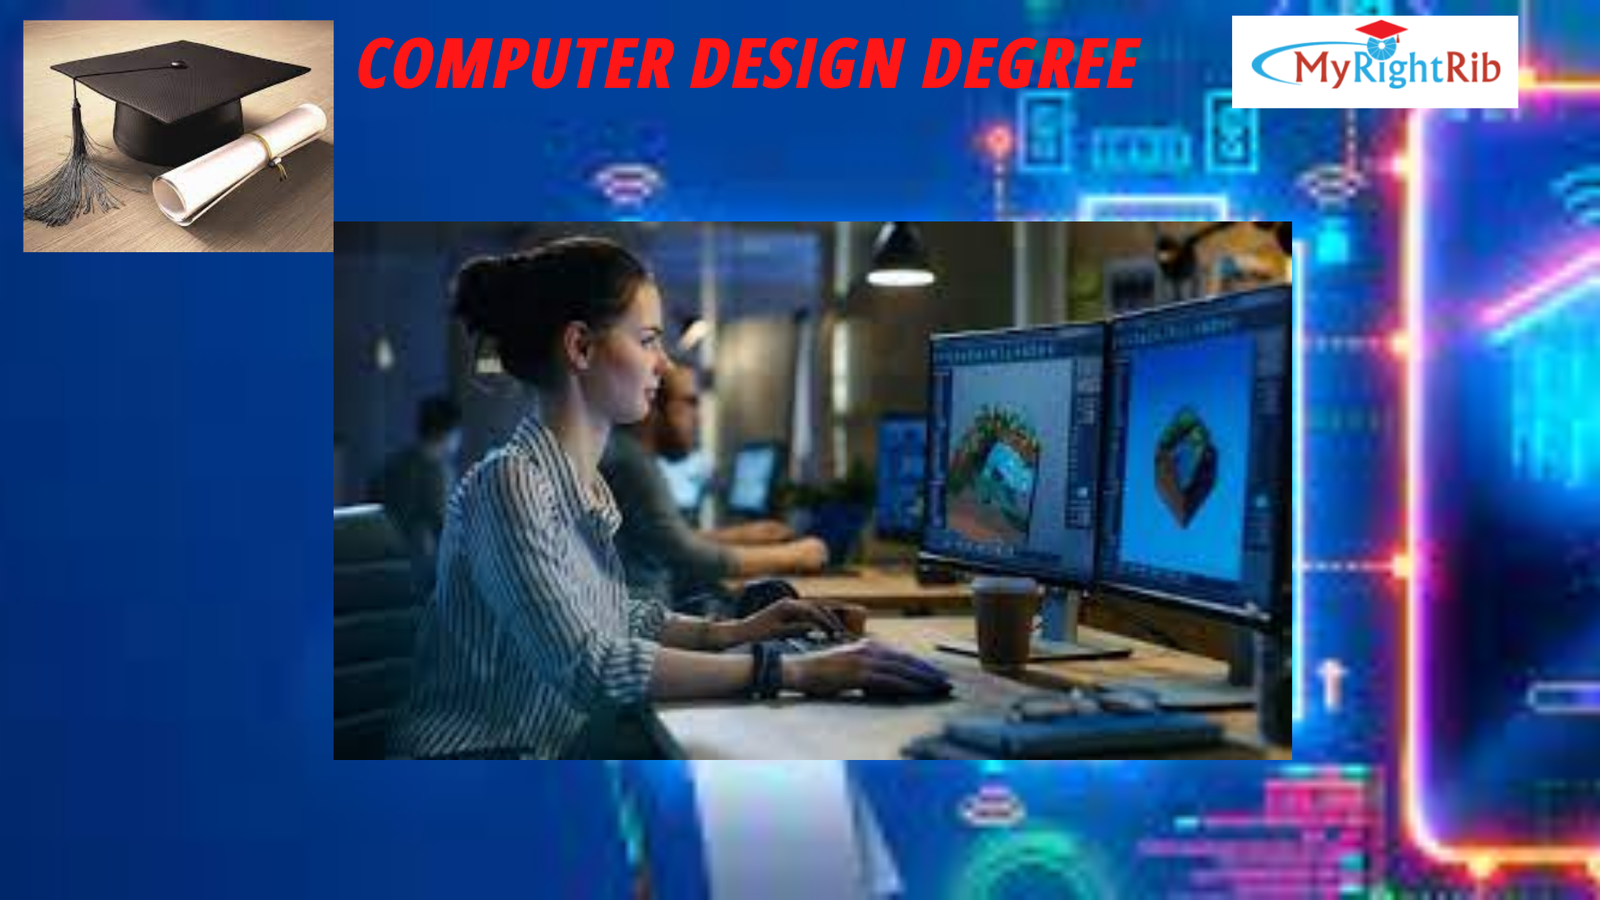 COMPUTER DESIGN DEGREE: POSSIBLE CAREER, SALARY AND OBTAINABLE DEGREES